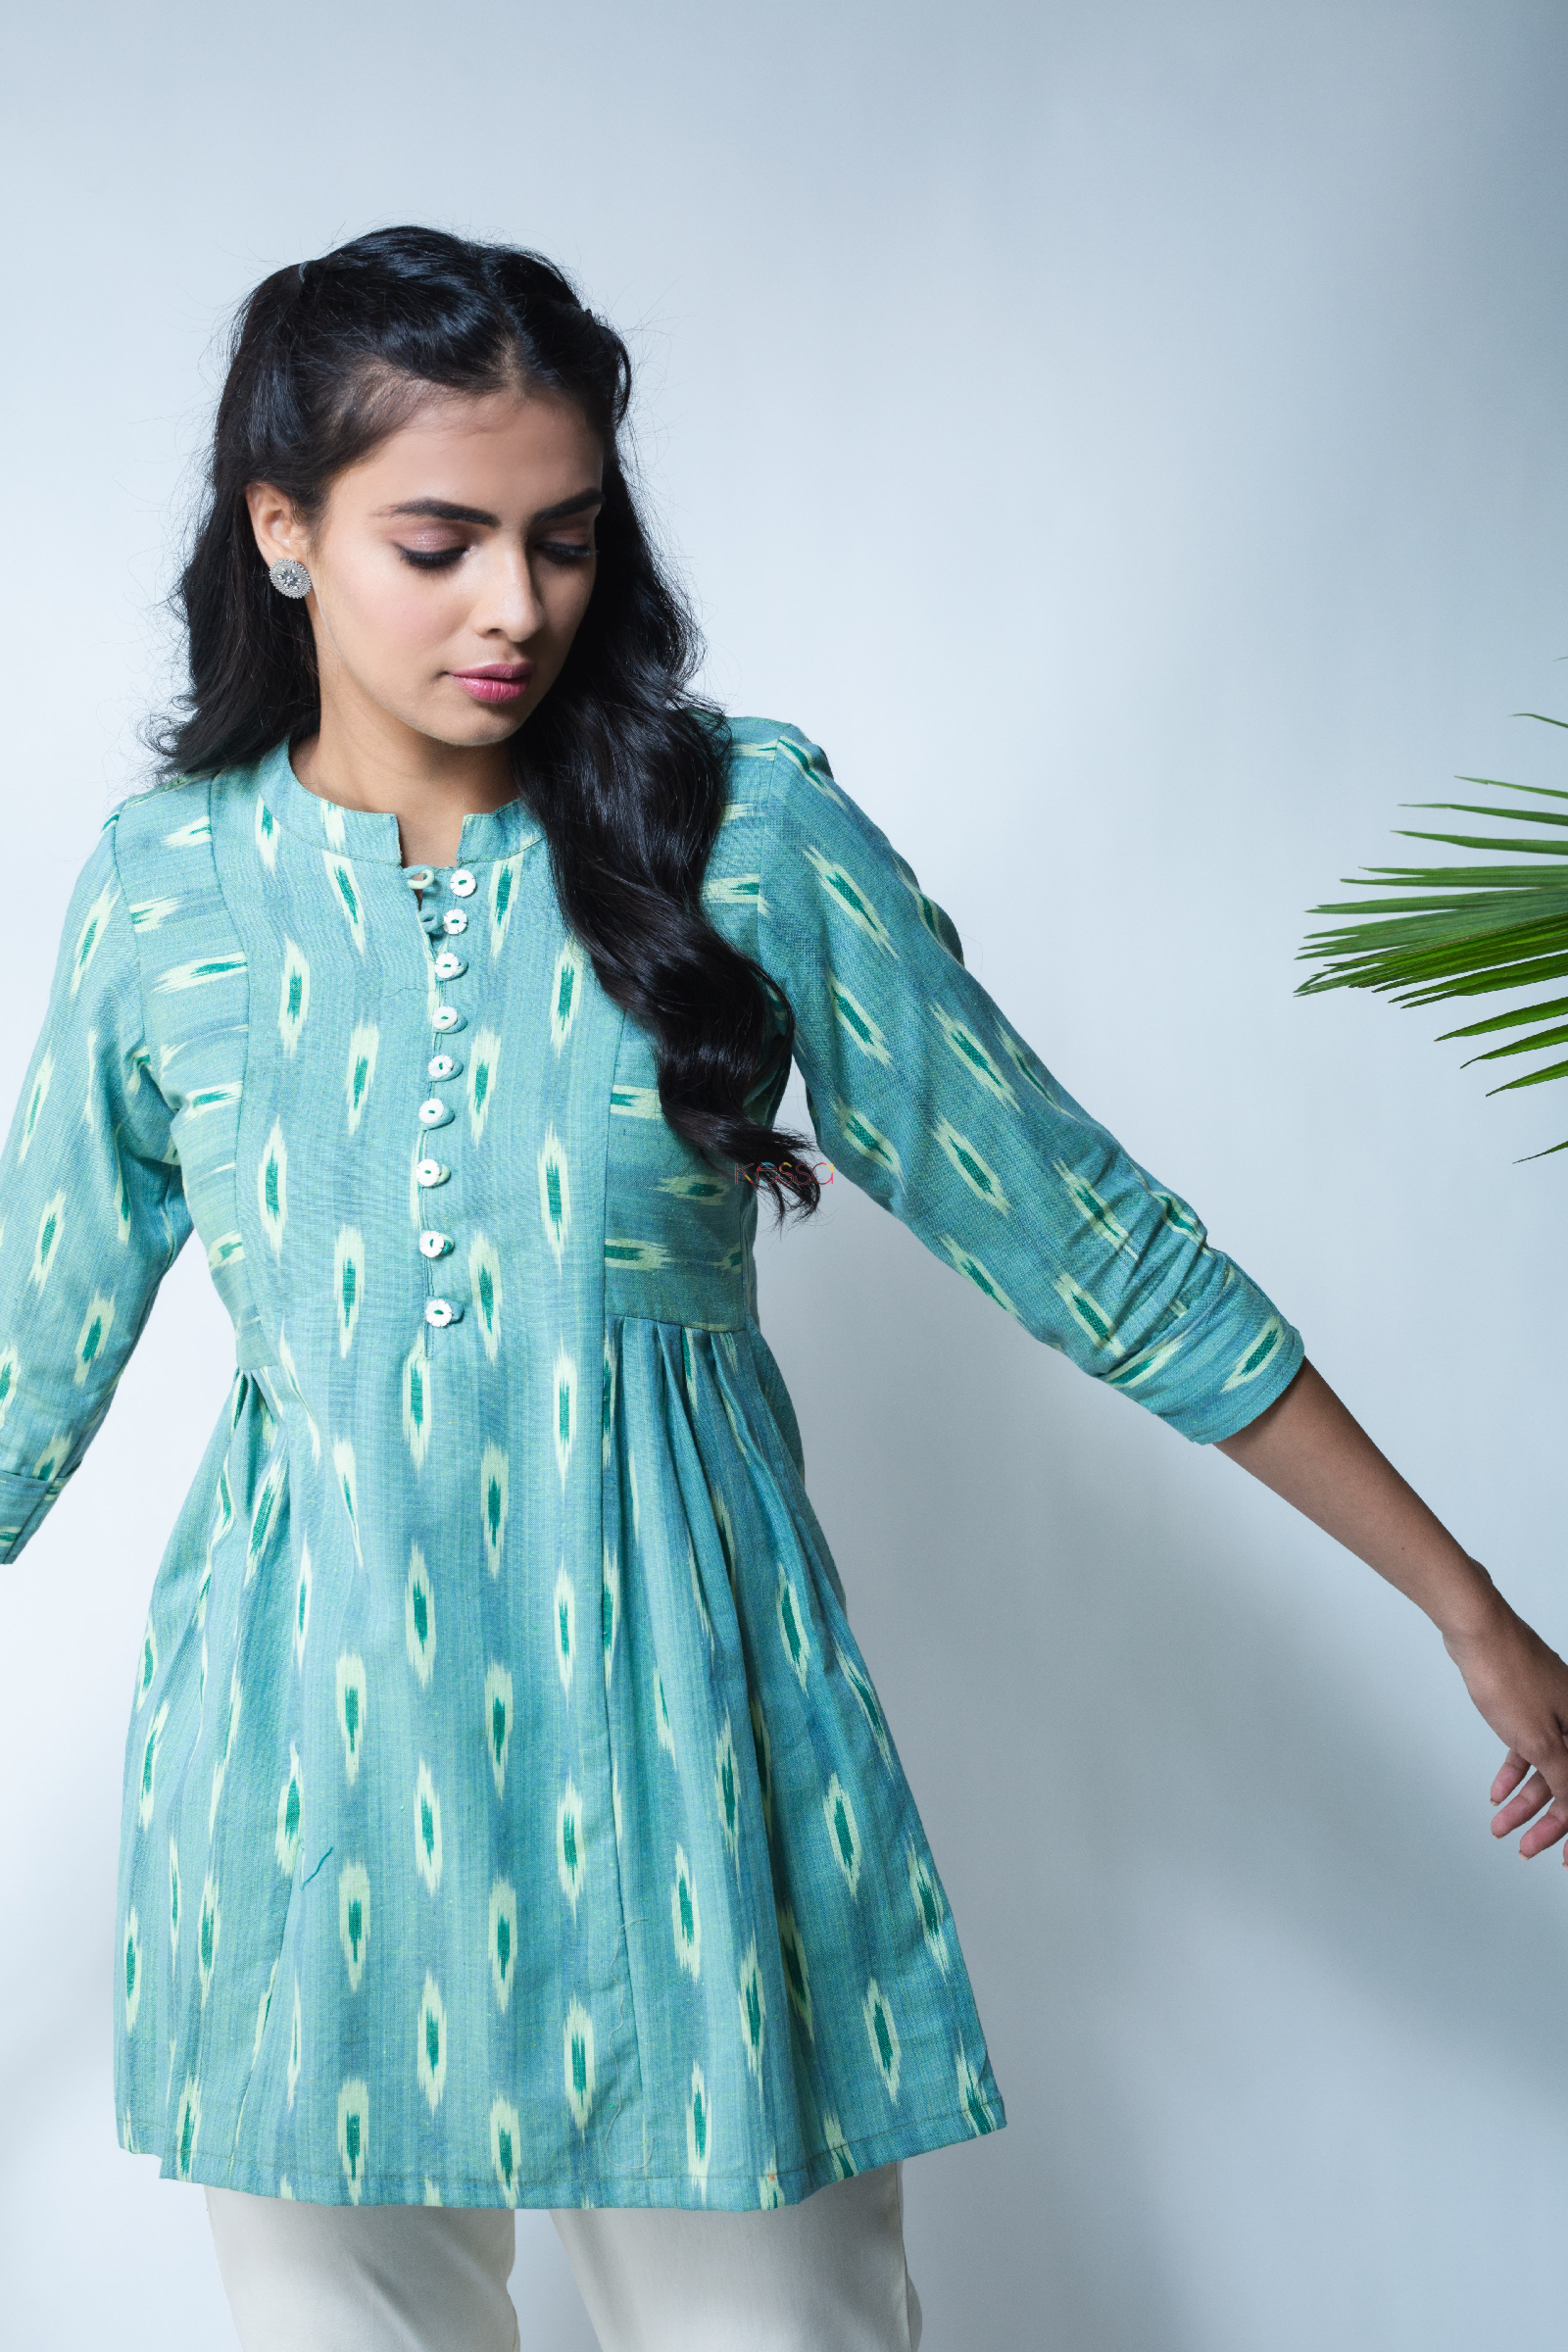 50 Long Kurti Designs for You to be the TRENDSETTER! - LooksGud.com | Long  kurti designs, Kurti designs, Trend setter